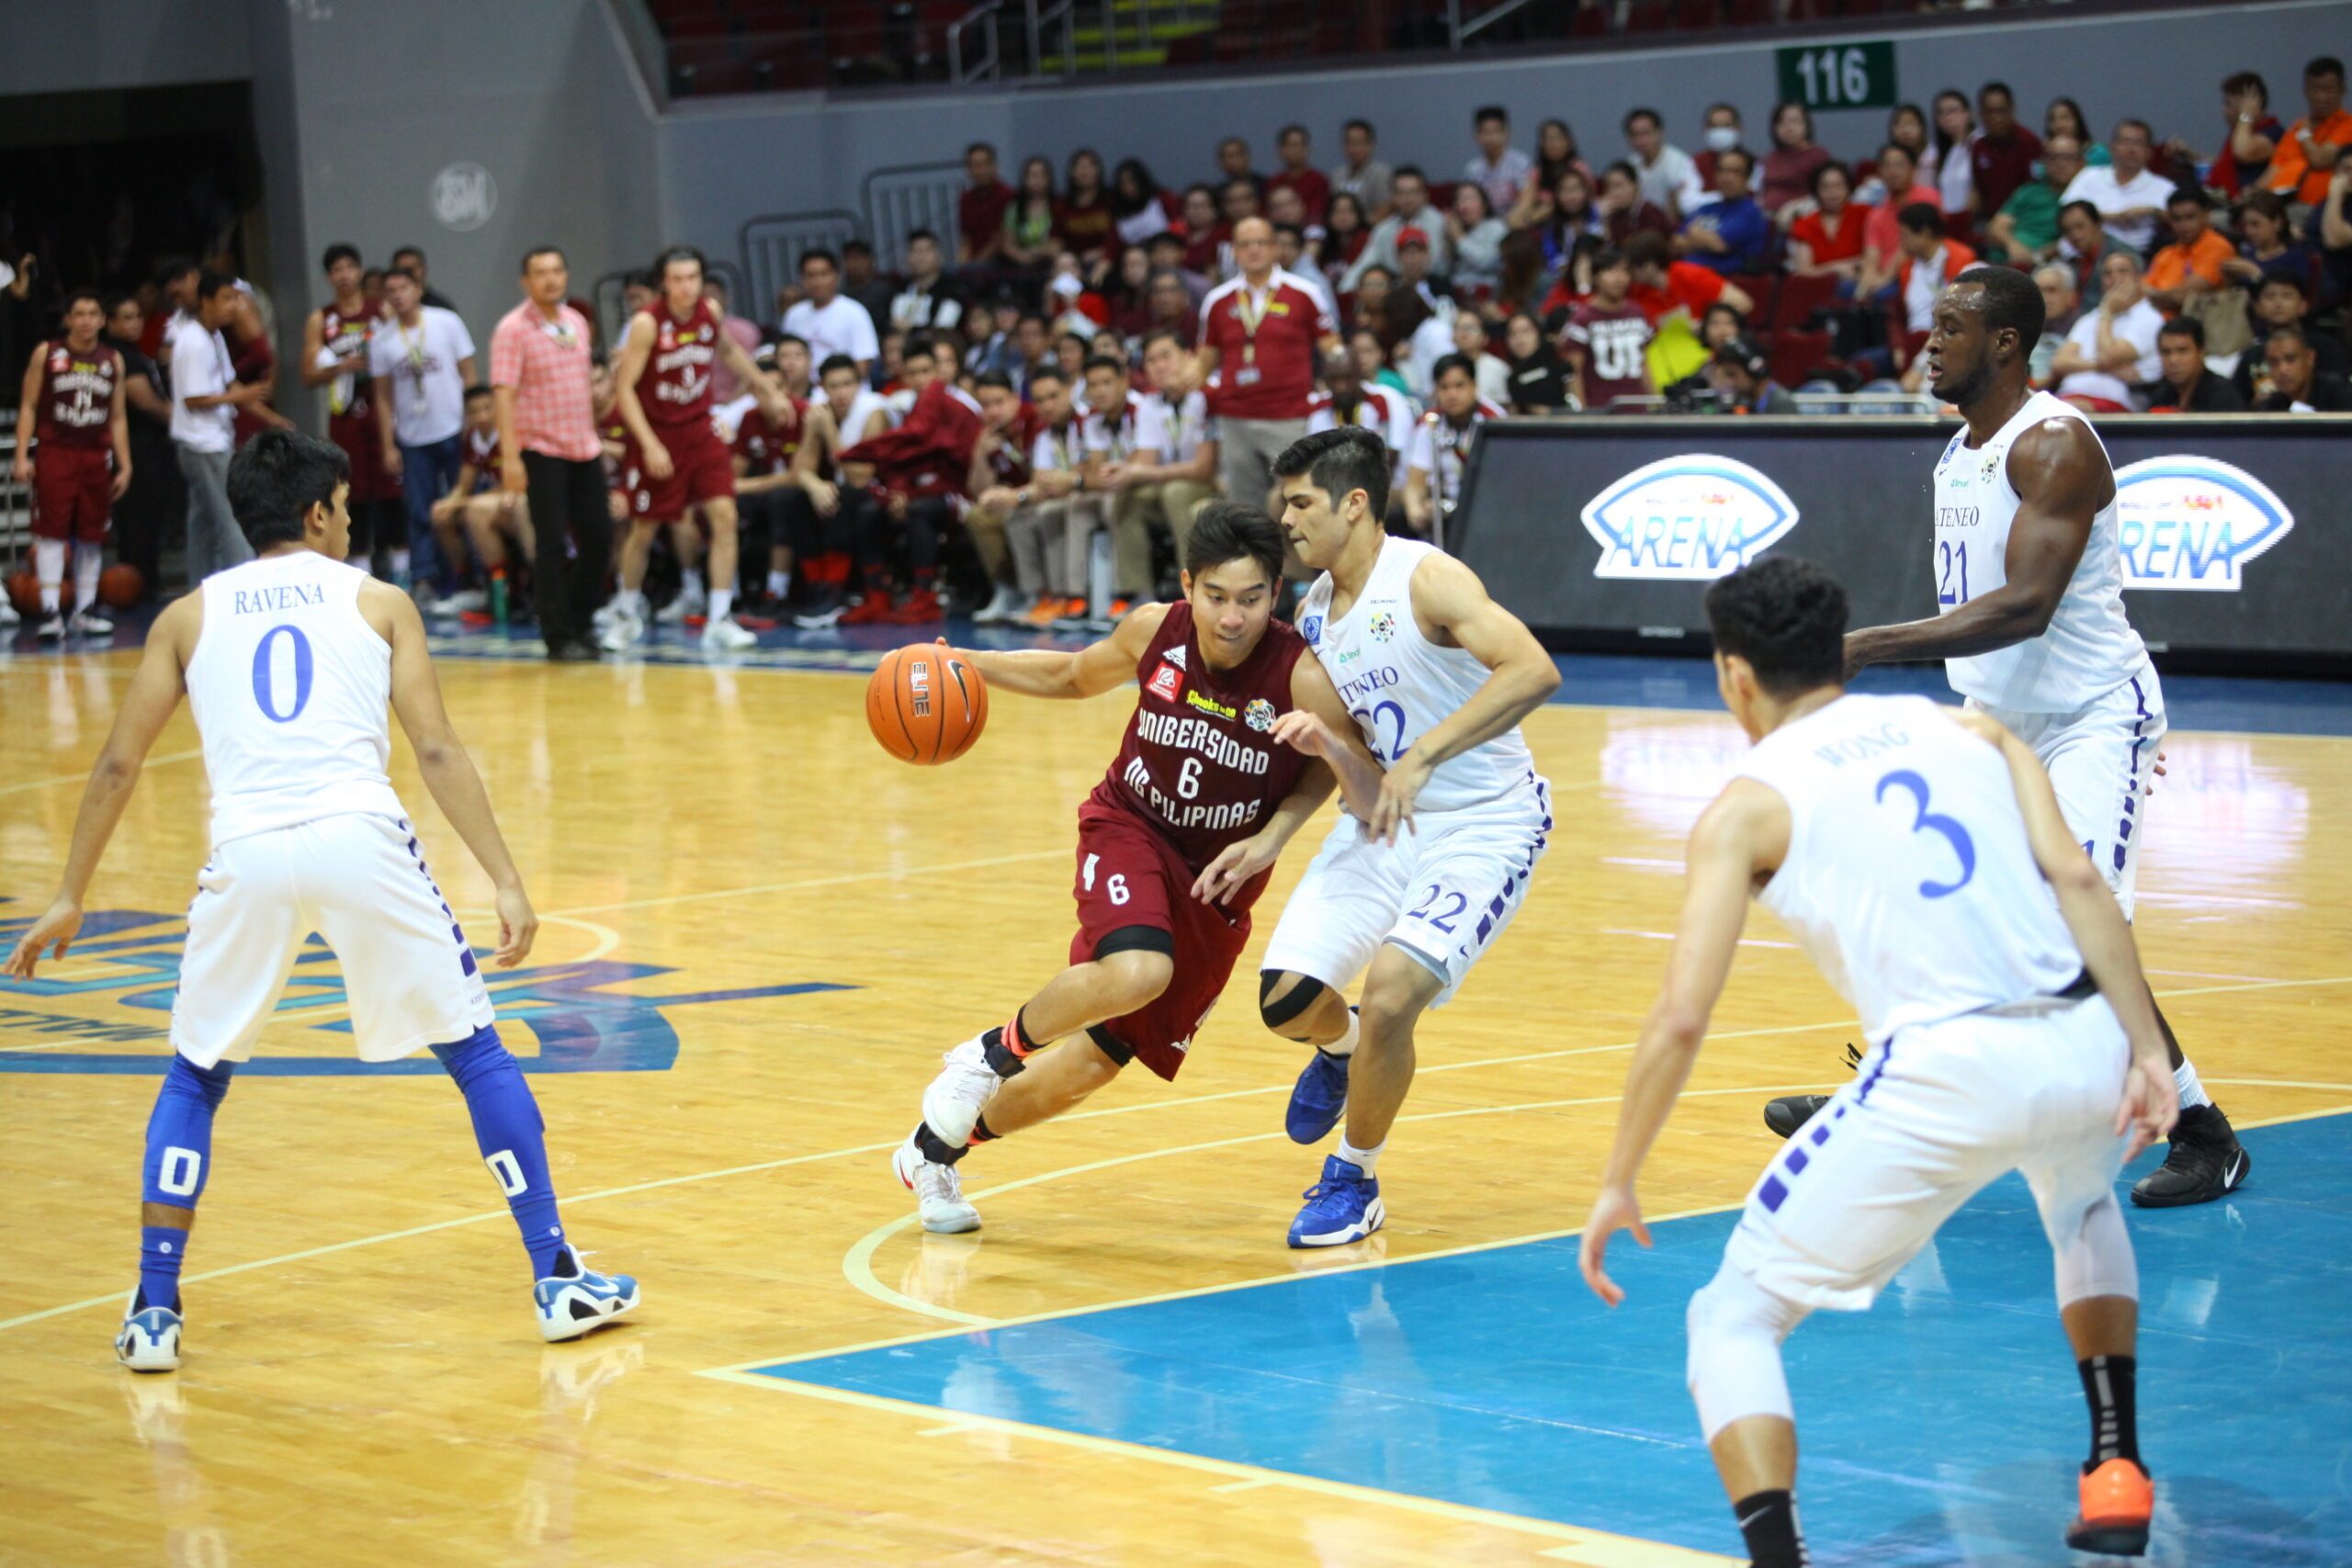 UP upsets Ateneo to end 7-year losing streak